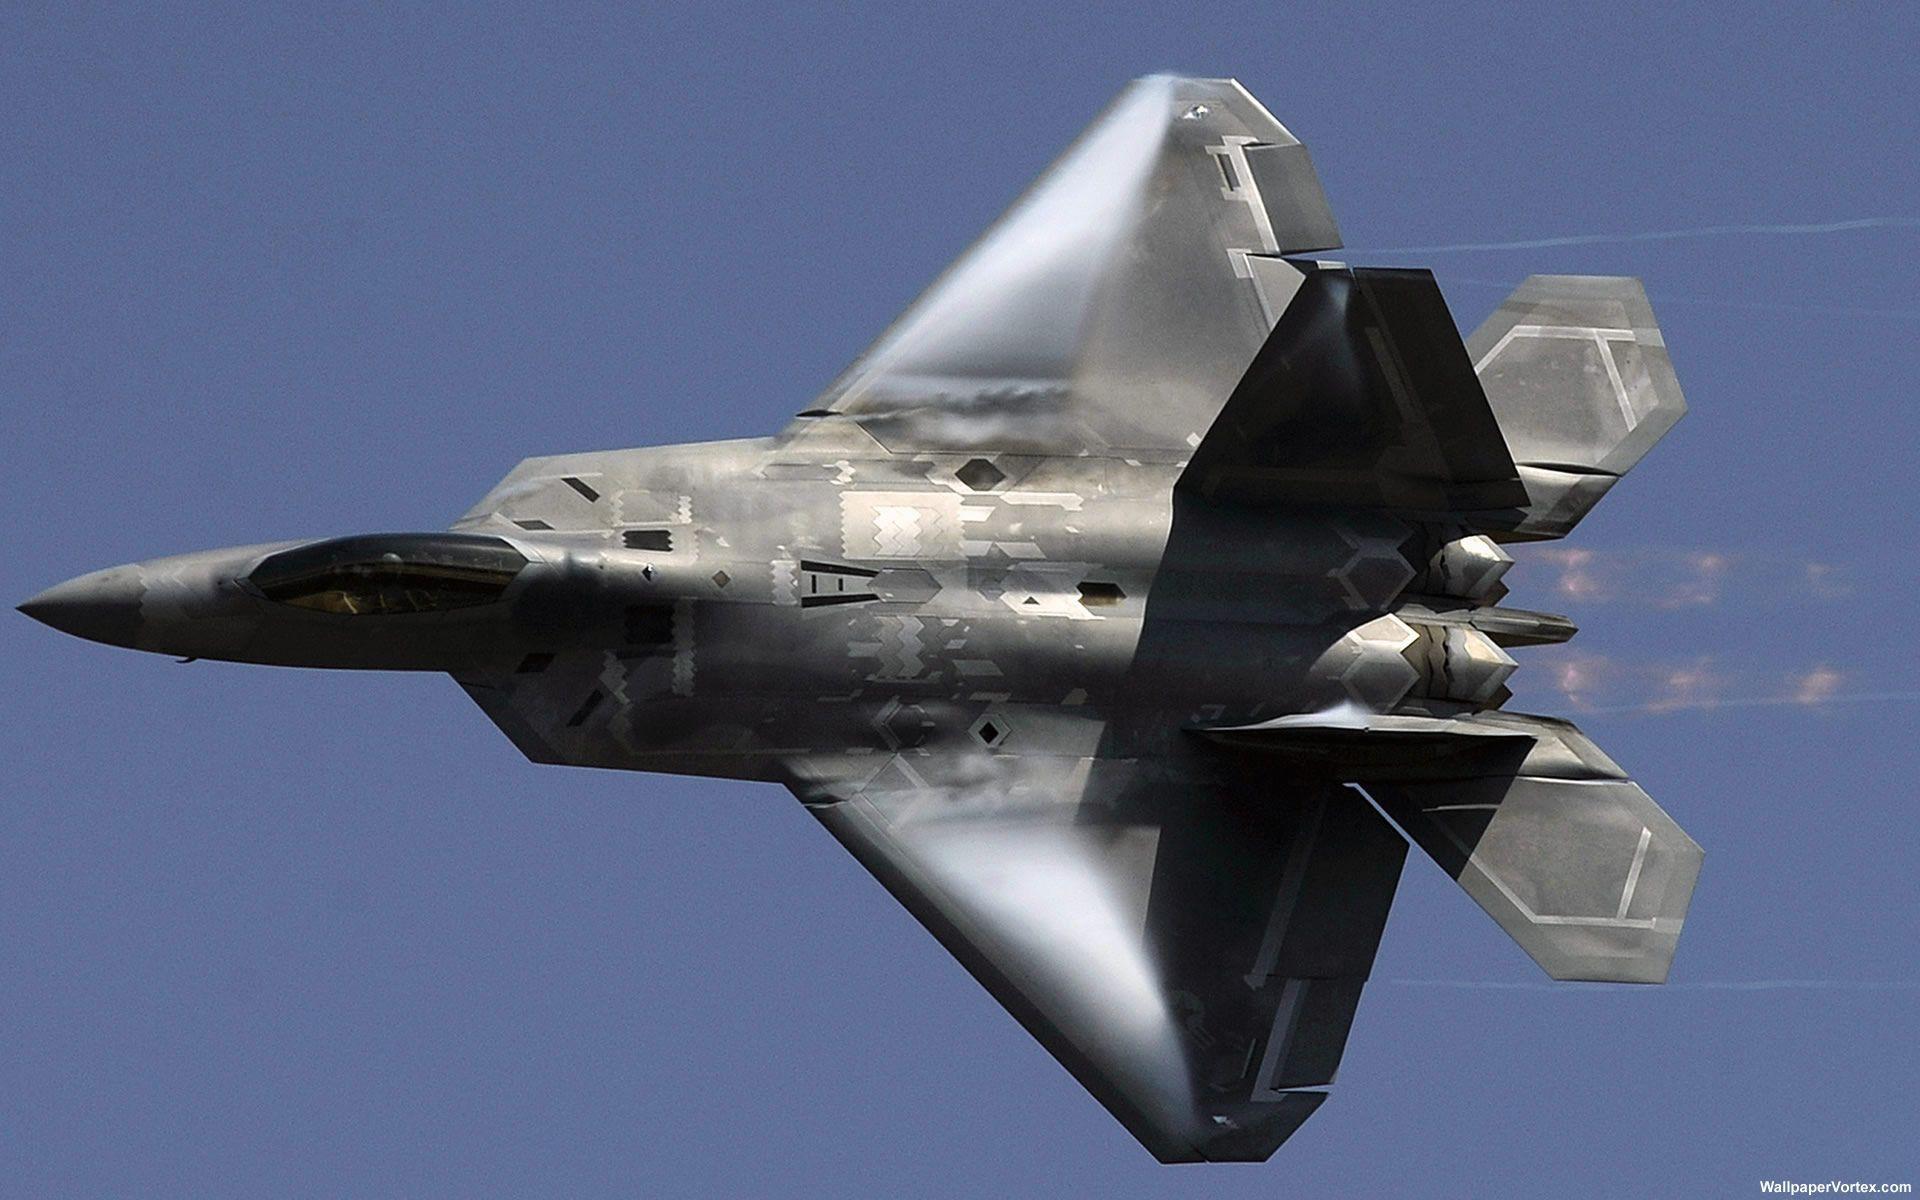 Download 2560x1024 Wallpaper Lockheed Martin F 22 Raptor Sky Clouds  Fighter Airplane 4k Dual Wide Wide 219 Widescreen 2560x1024 Hd Image  Background 24422